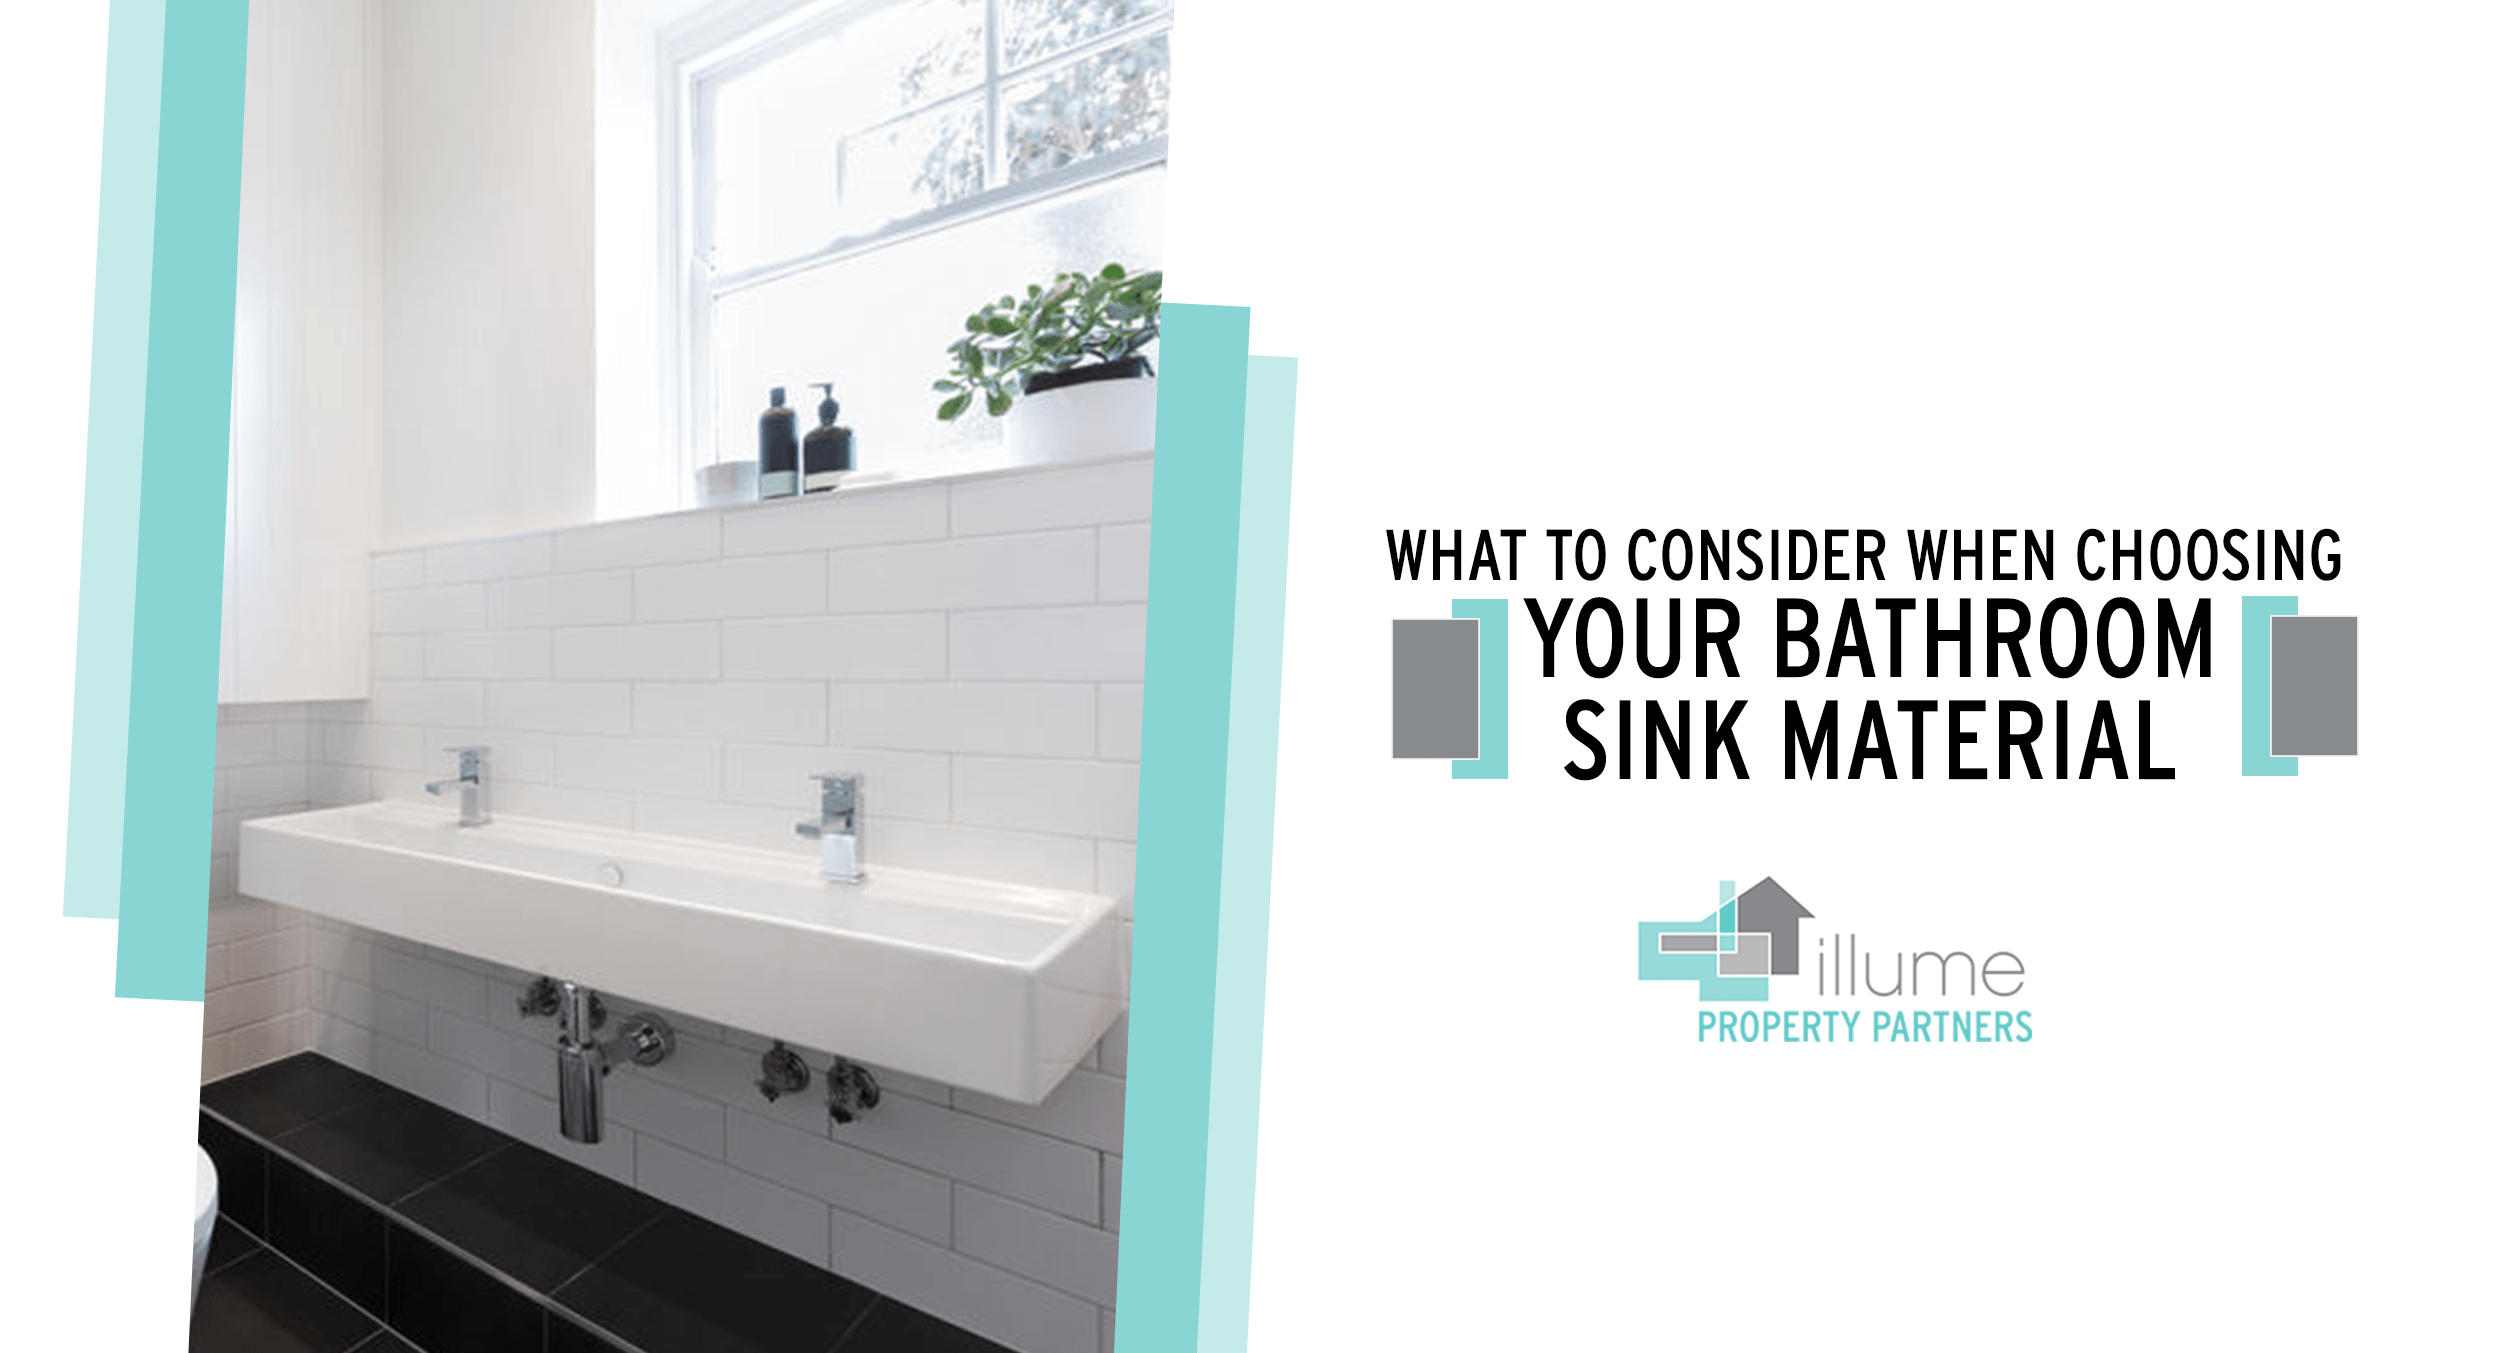 What to Consider When Choosing Your Bathroom Sink Material